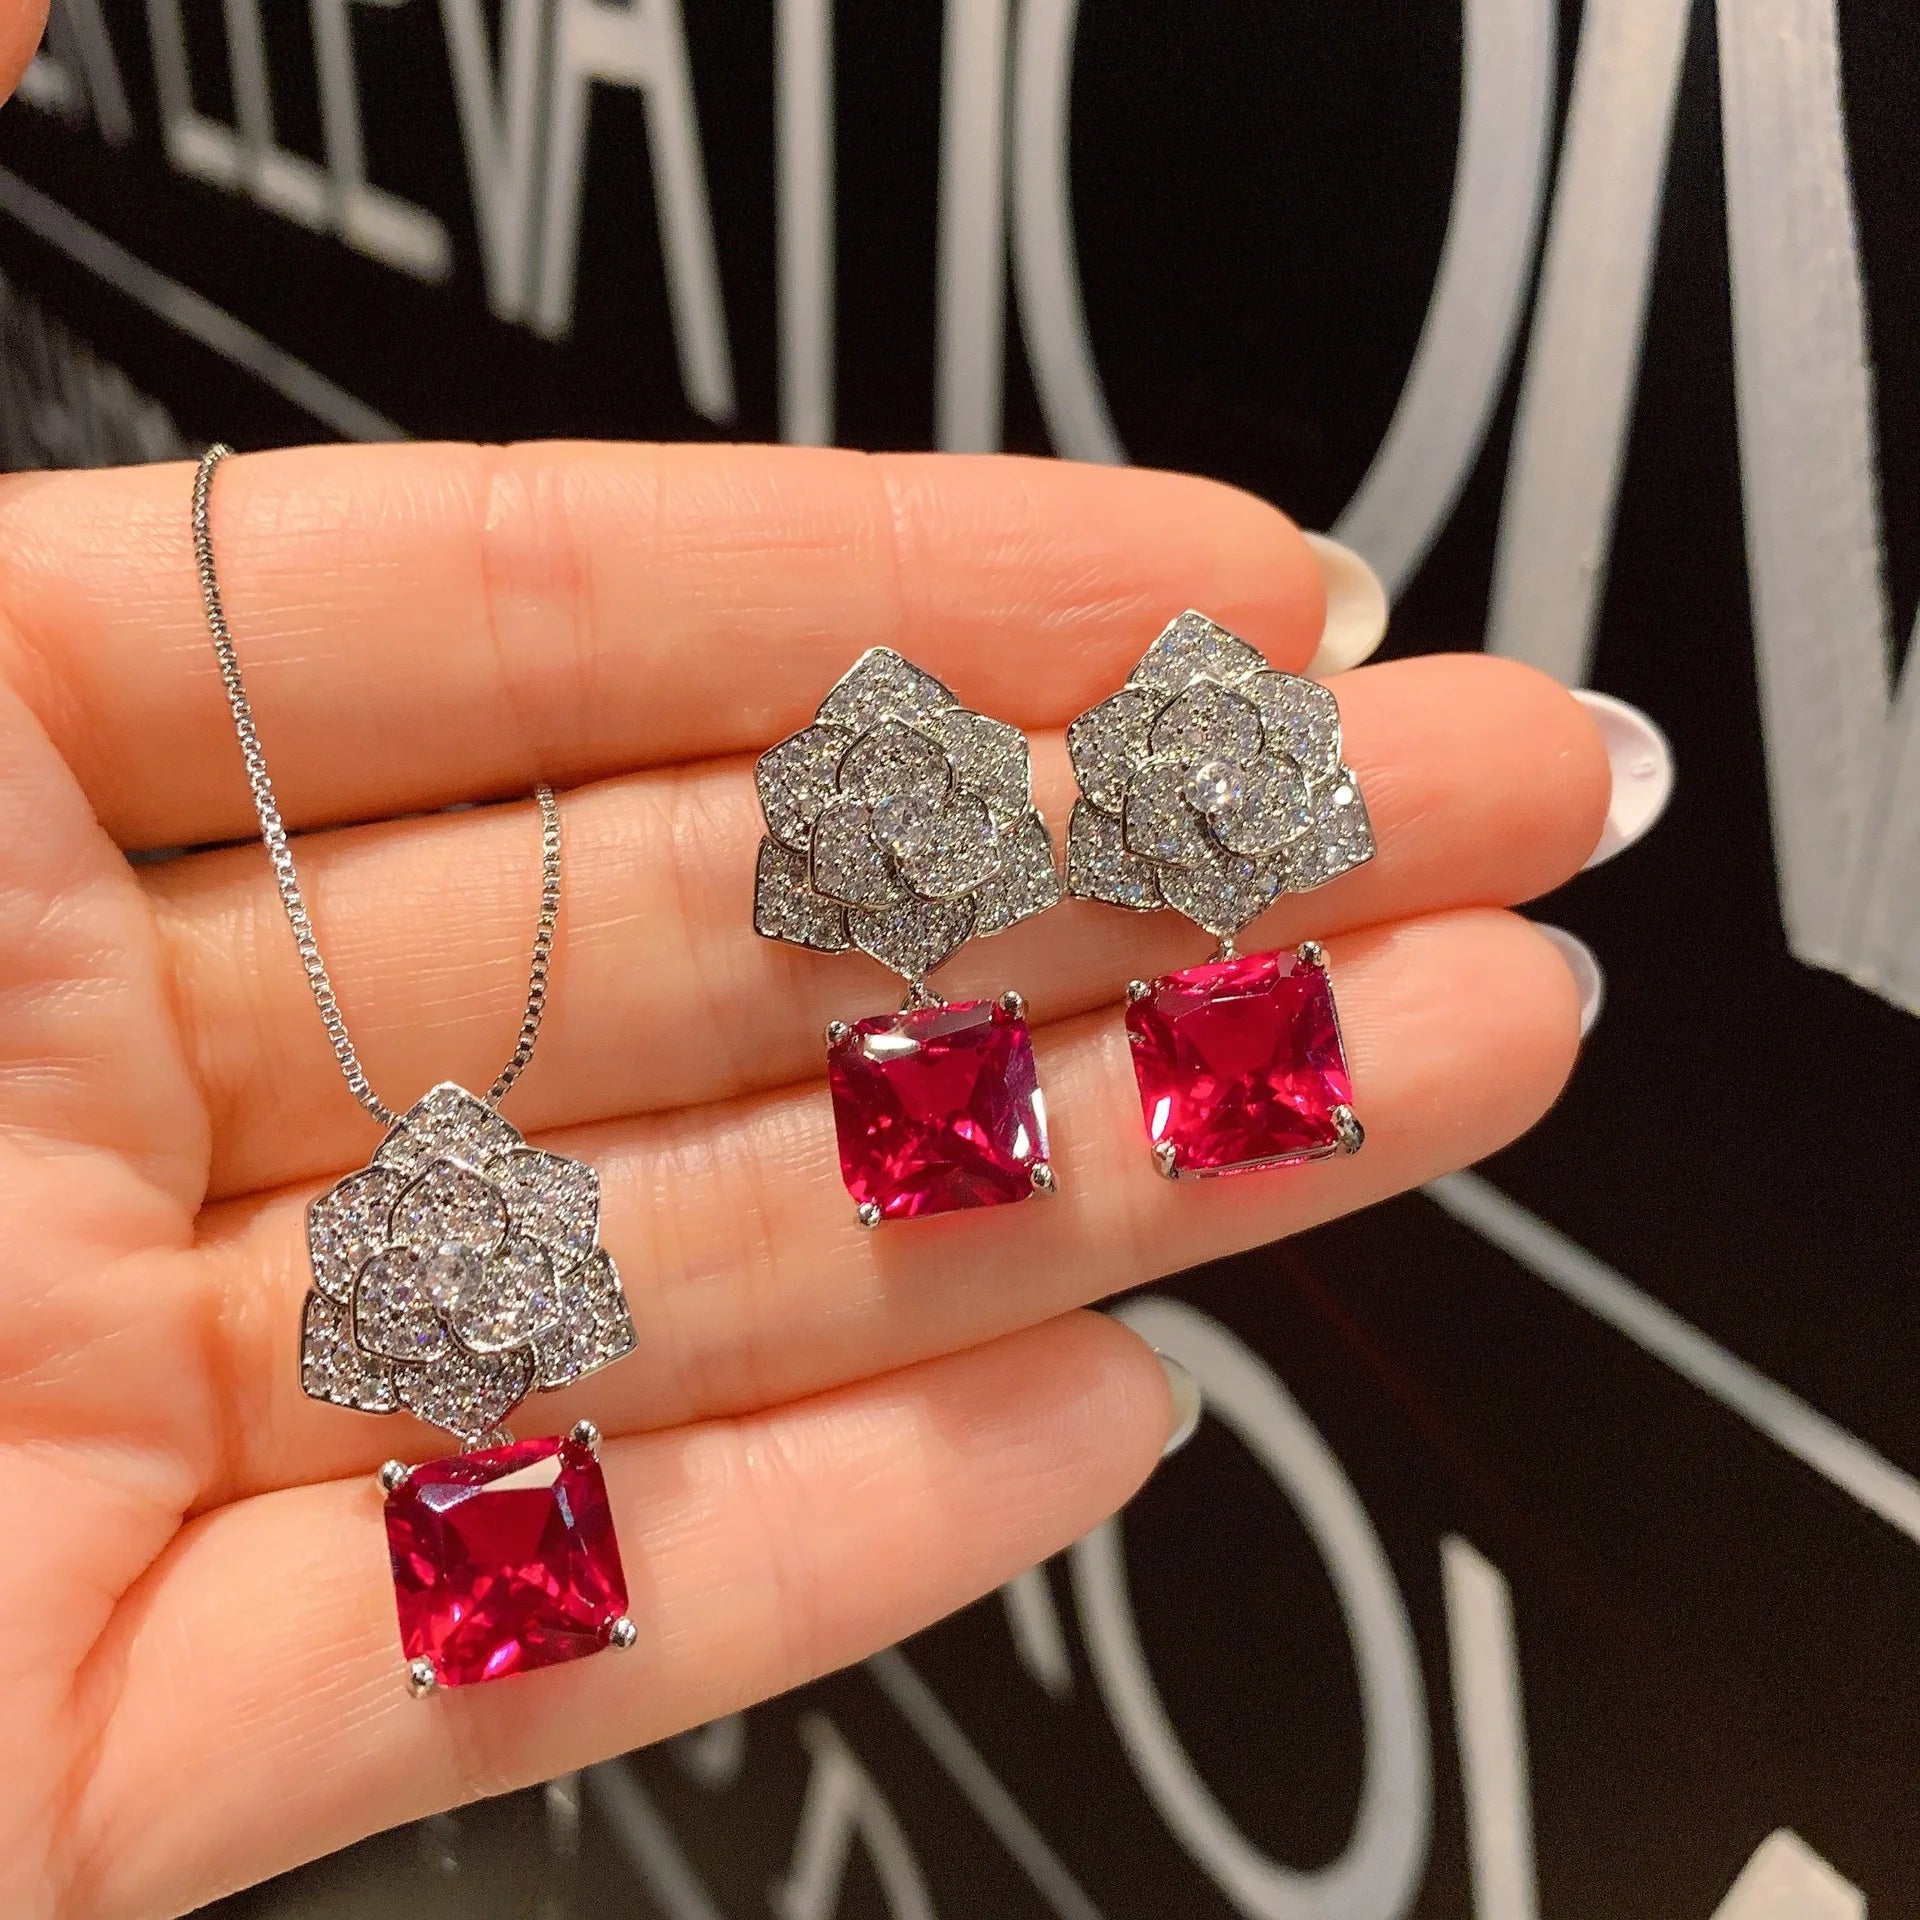 Square Ruby Gemstone Camellia Flower Necklace Earrings Pendant Jewelry Set